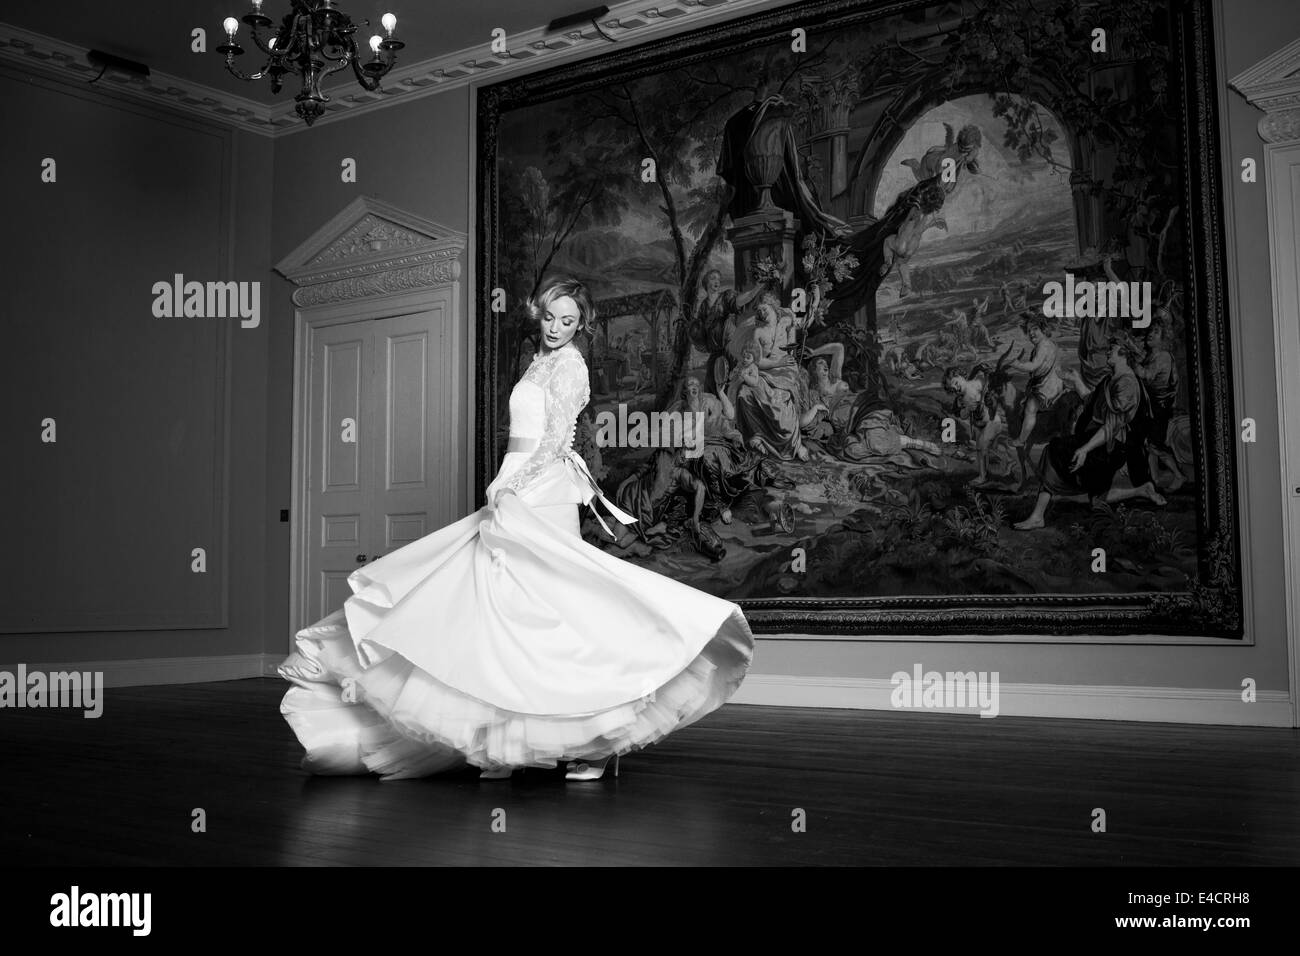 Wedding preparations, Bride dancing against old painting, Dorset, England Stock Photo